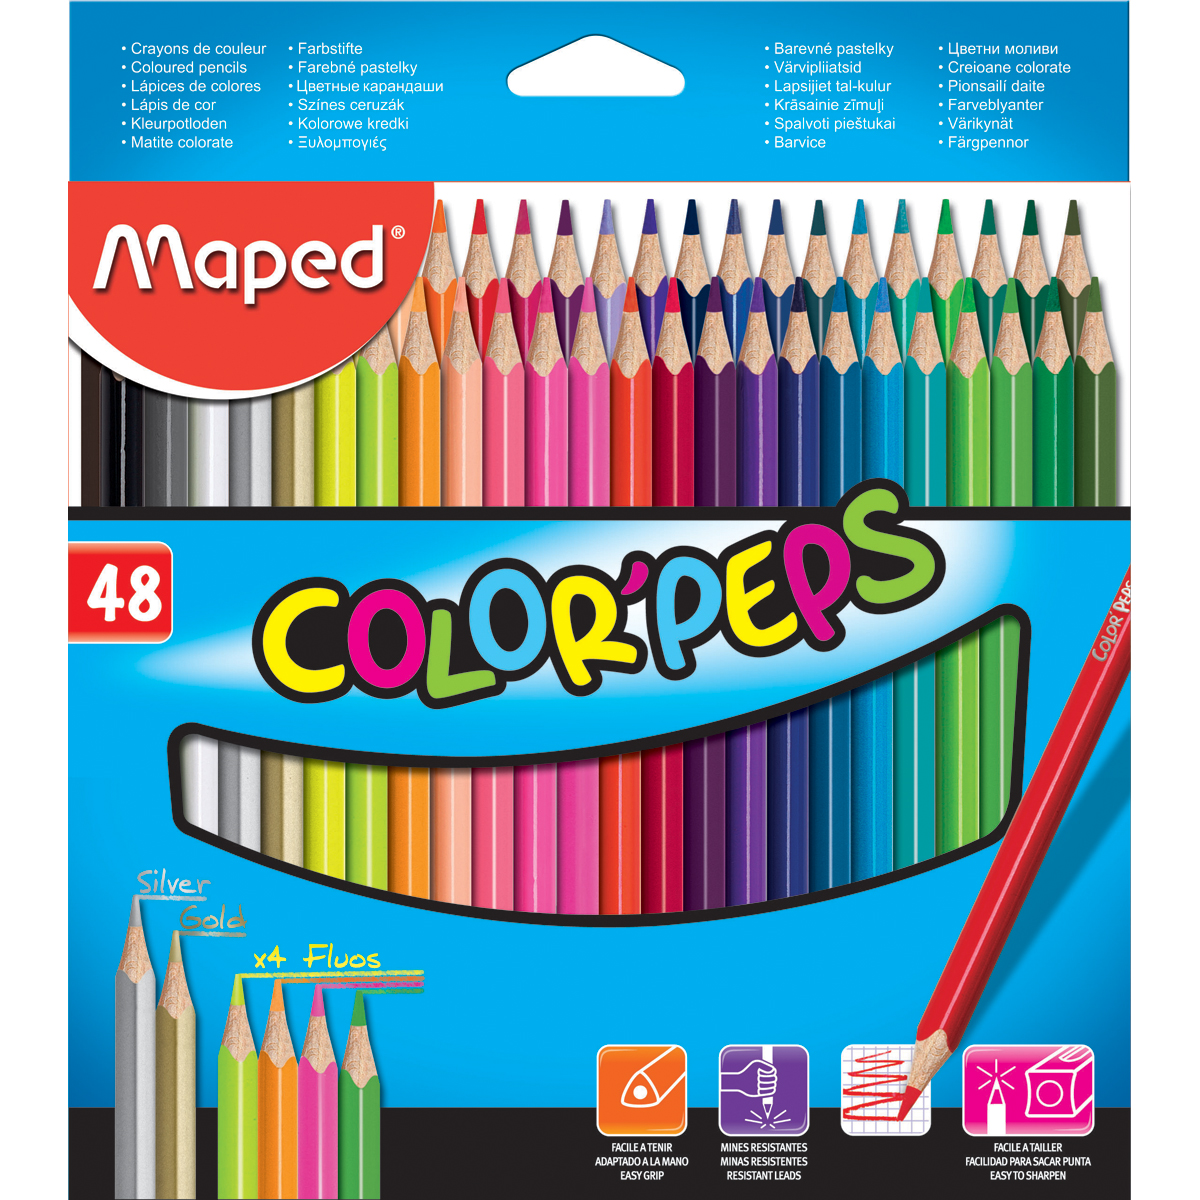 Maped Color'Peps Colored Pencil Set, 48-Pencils - image 2 of 3